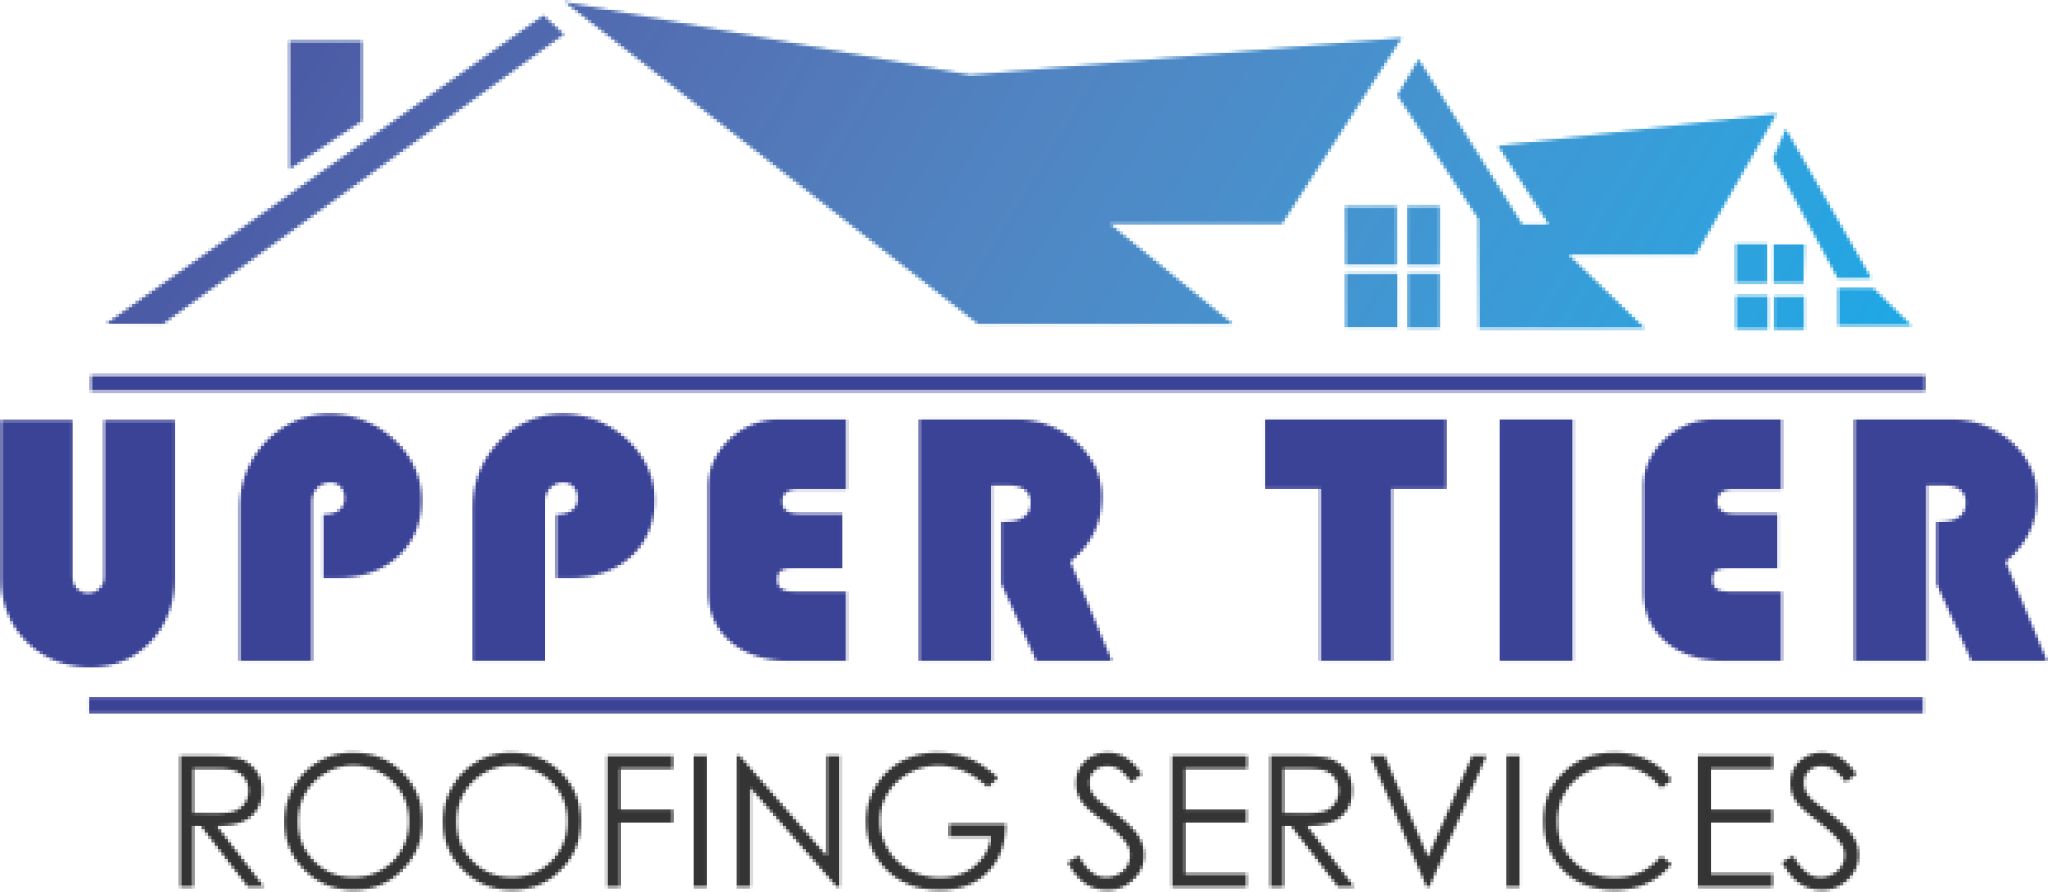 UPPER TIER ROOFING SERVICES.png